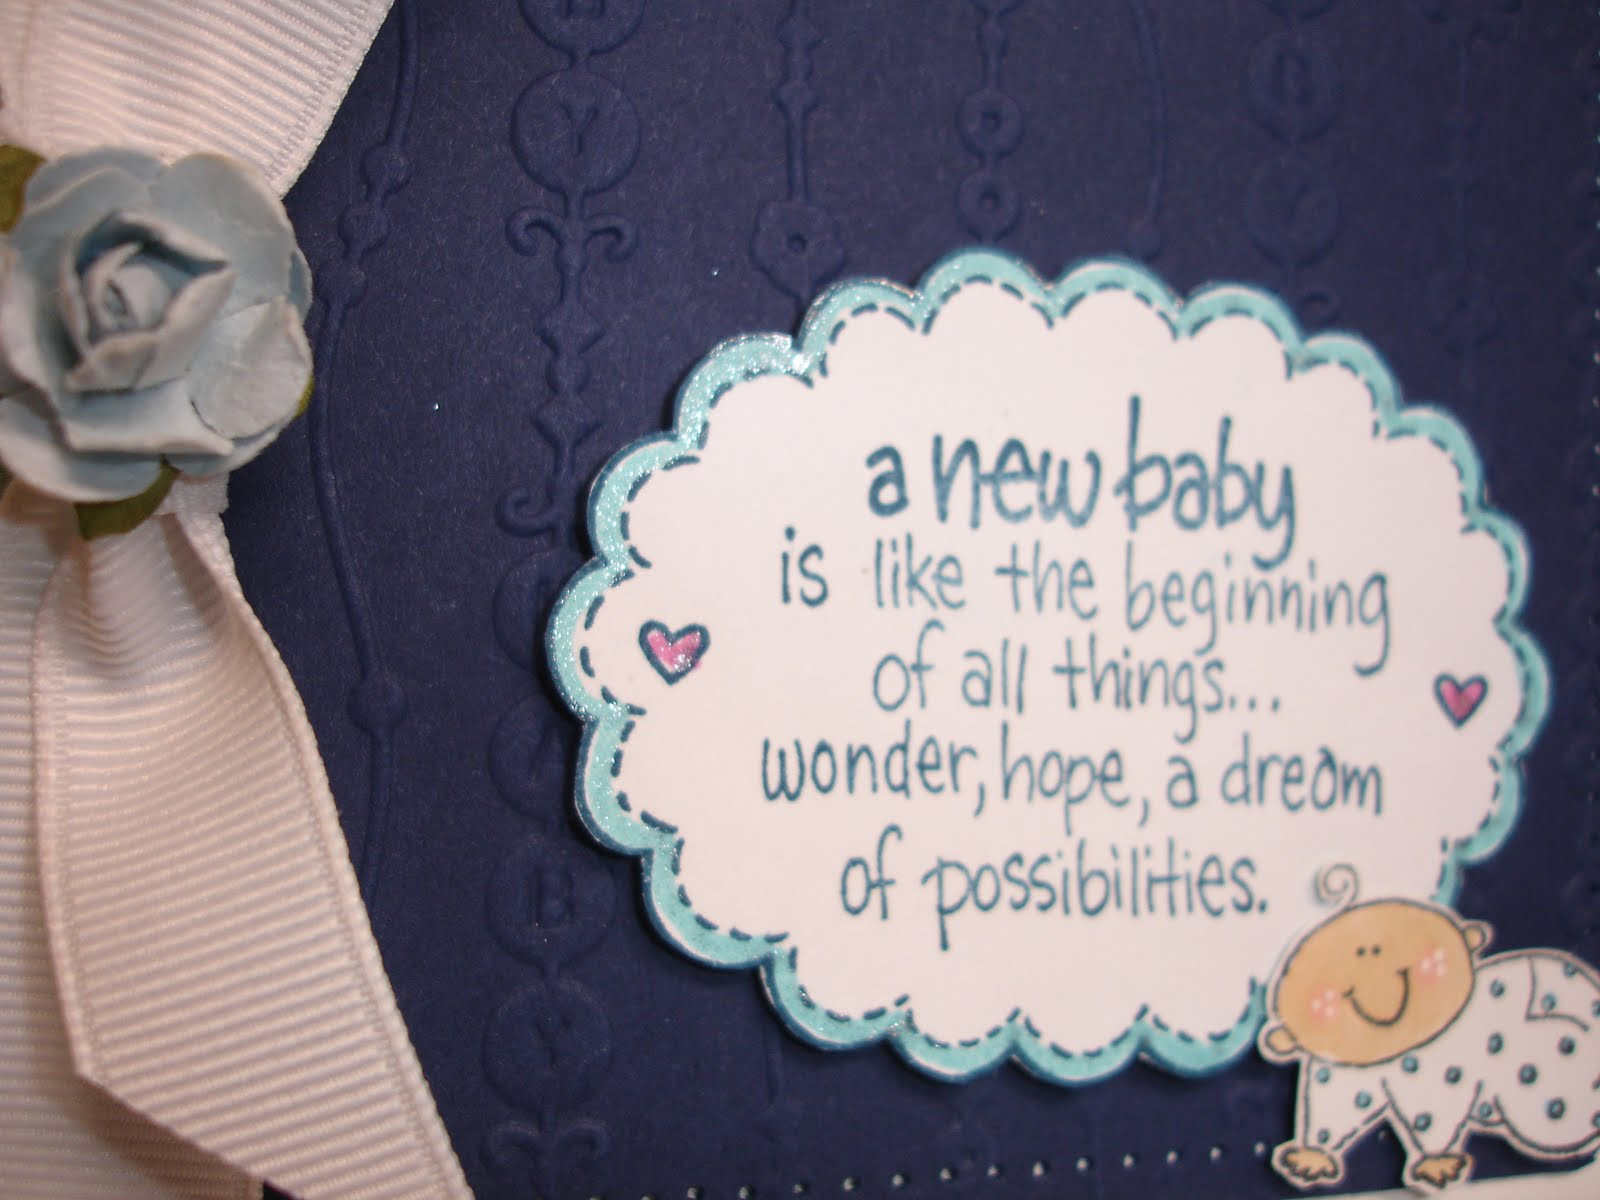 Baby Shower Gift Cards Wording
 Quotes For Baby Shower Cards QuotesGram